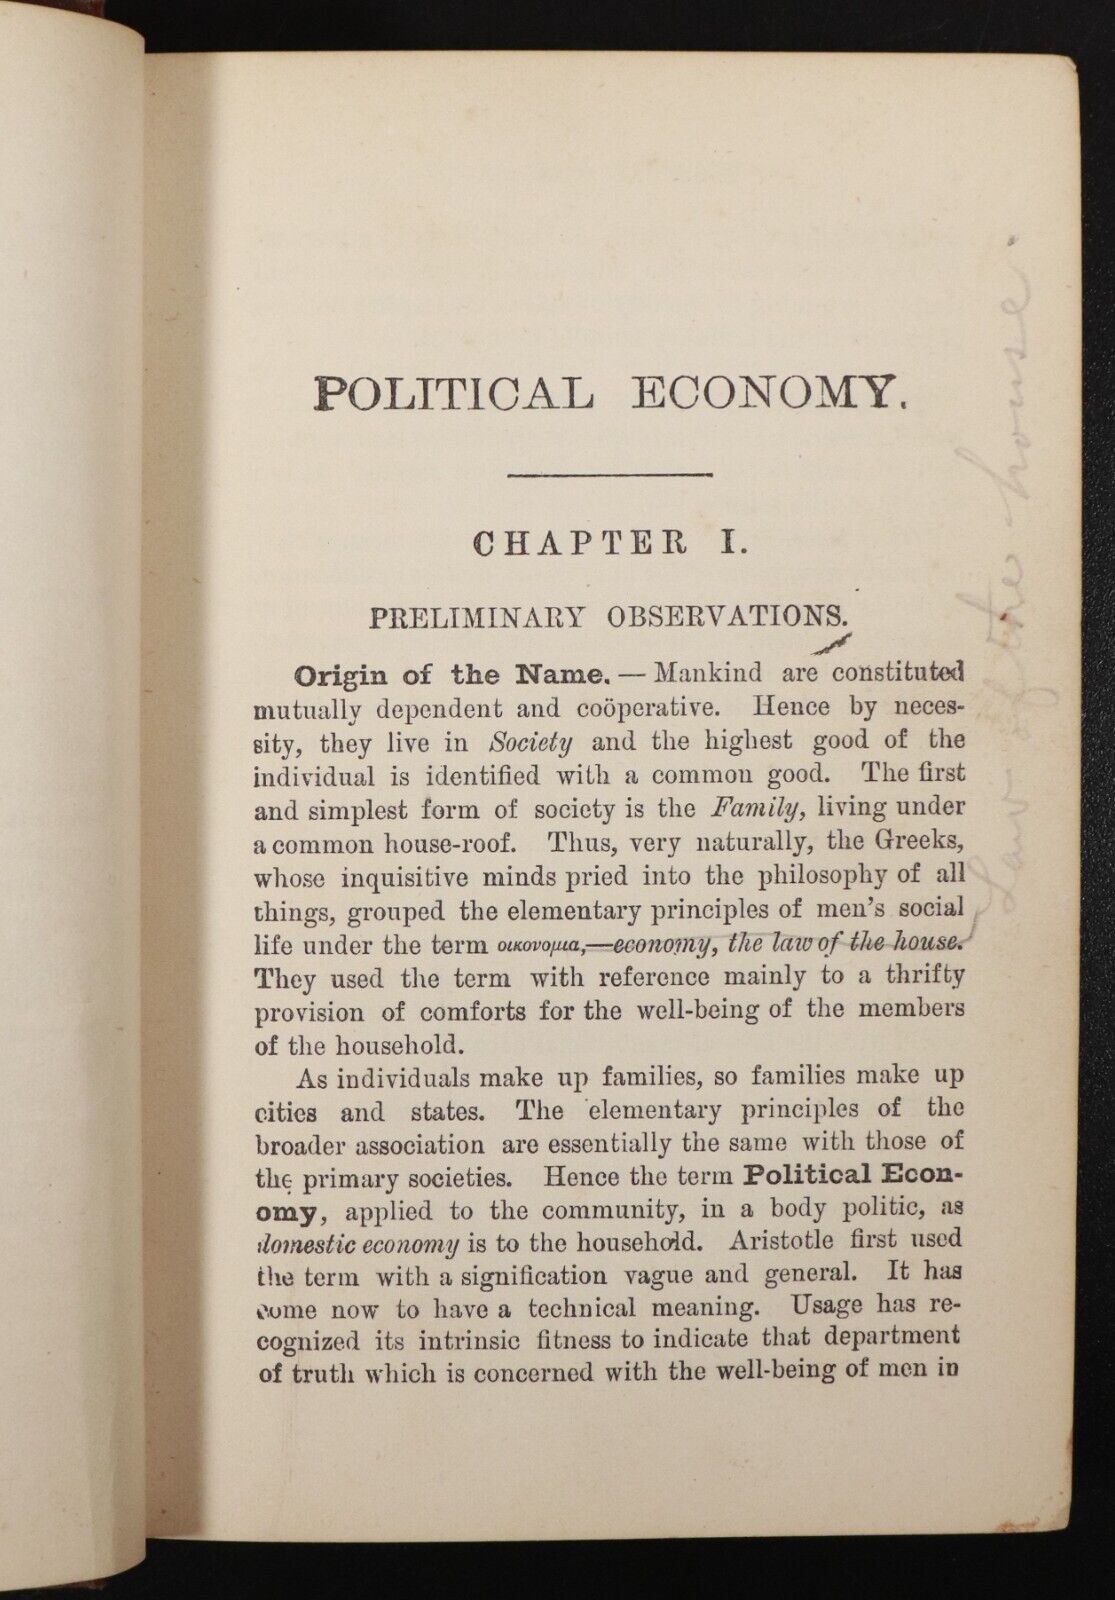 1886 The Elements Of Political Economy by F. Wayland Antique Economics Book